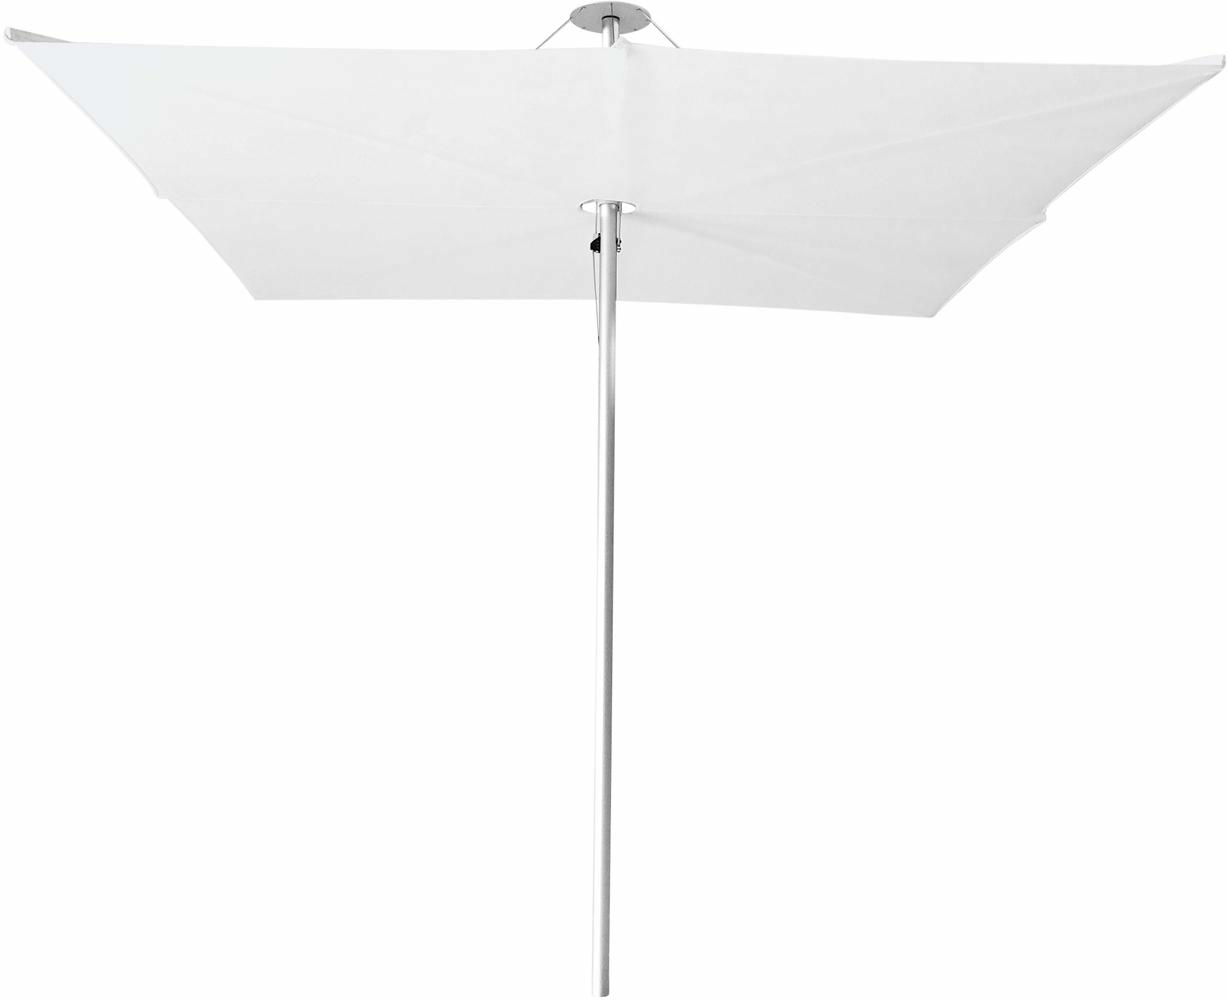 Infina center post umbrella, 2,5 m square, with frame in Aluminum and Solidum Natural canopy. 